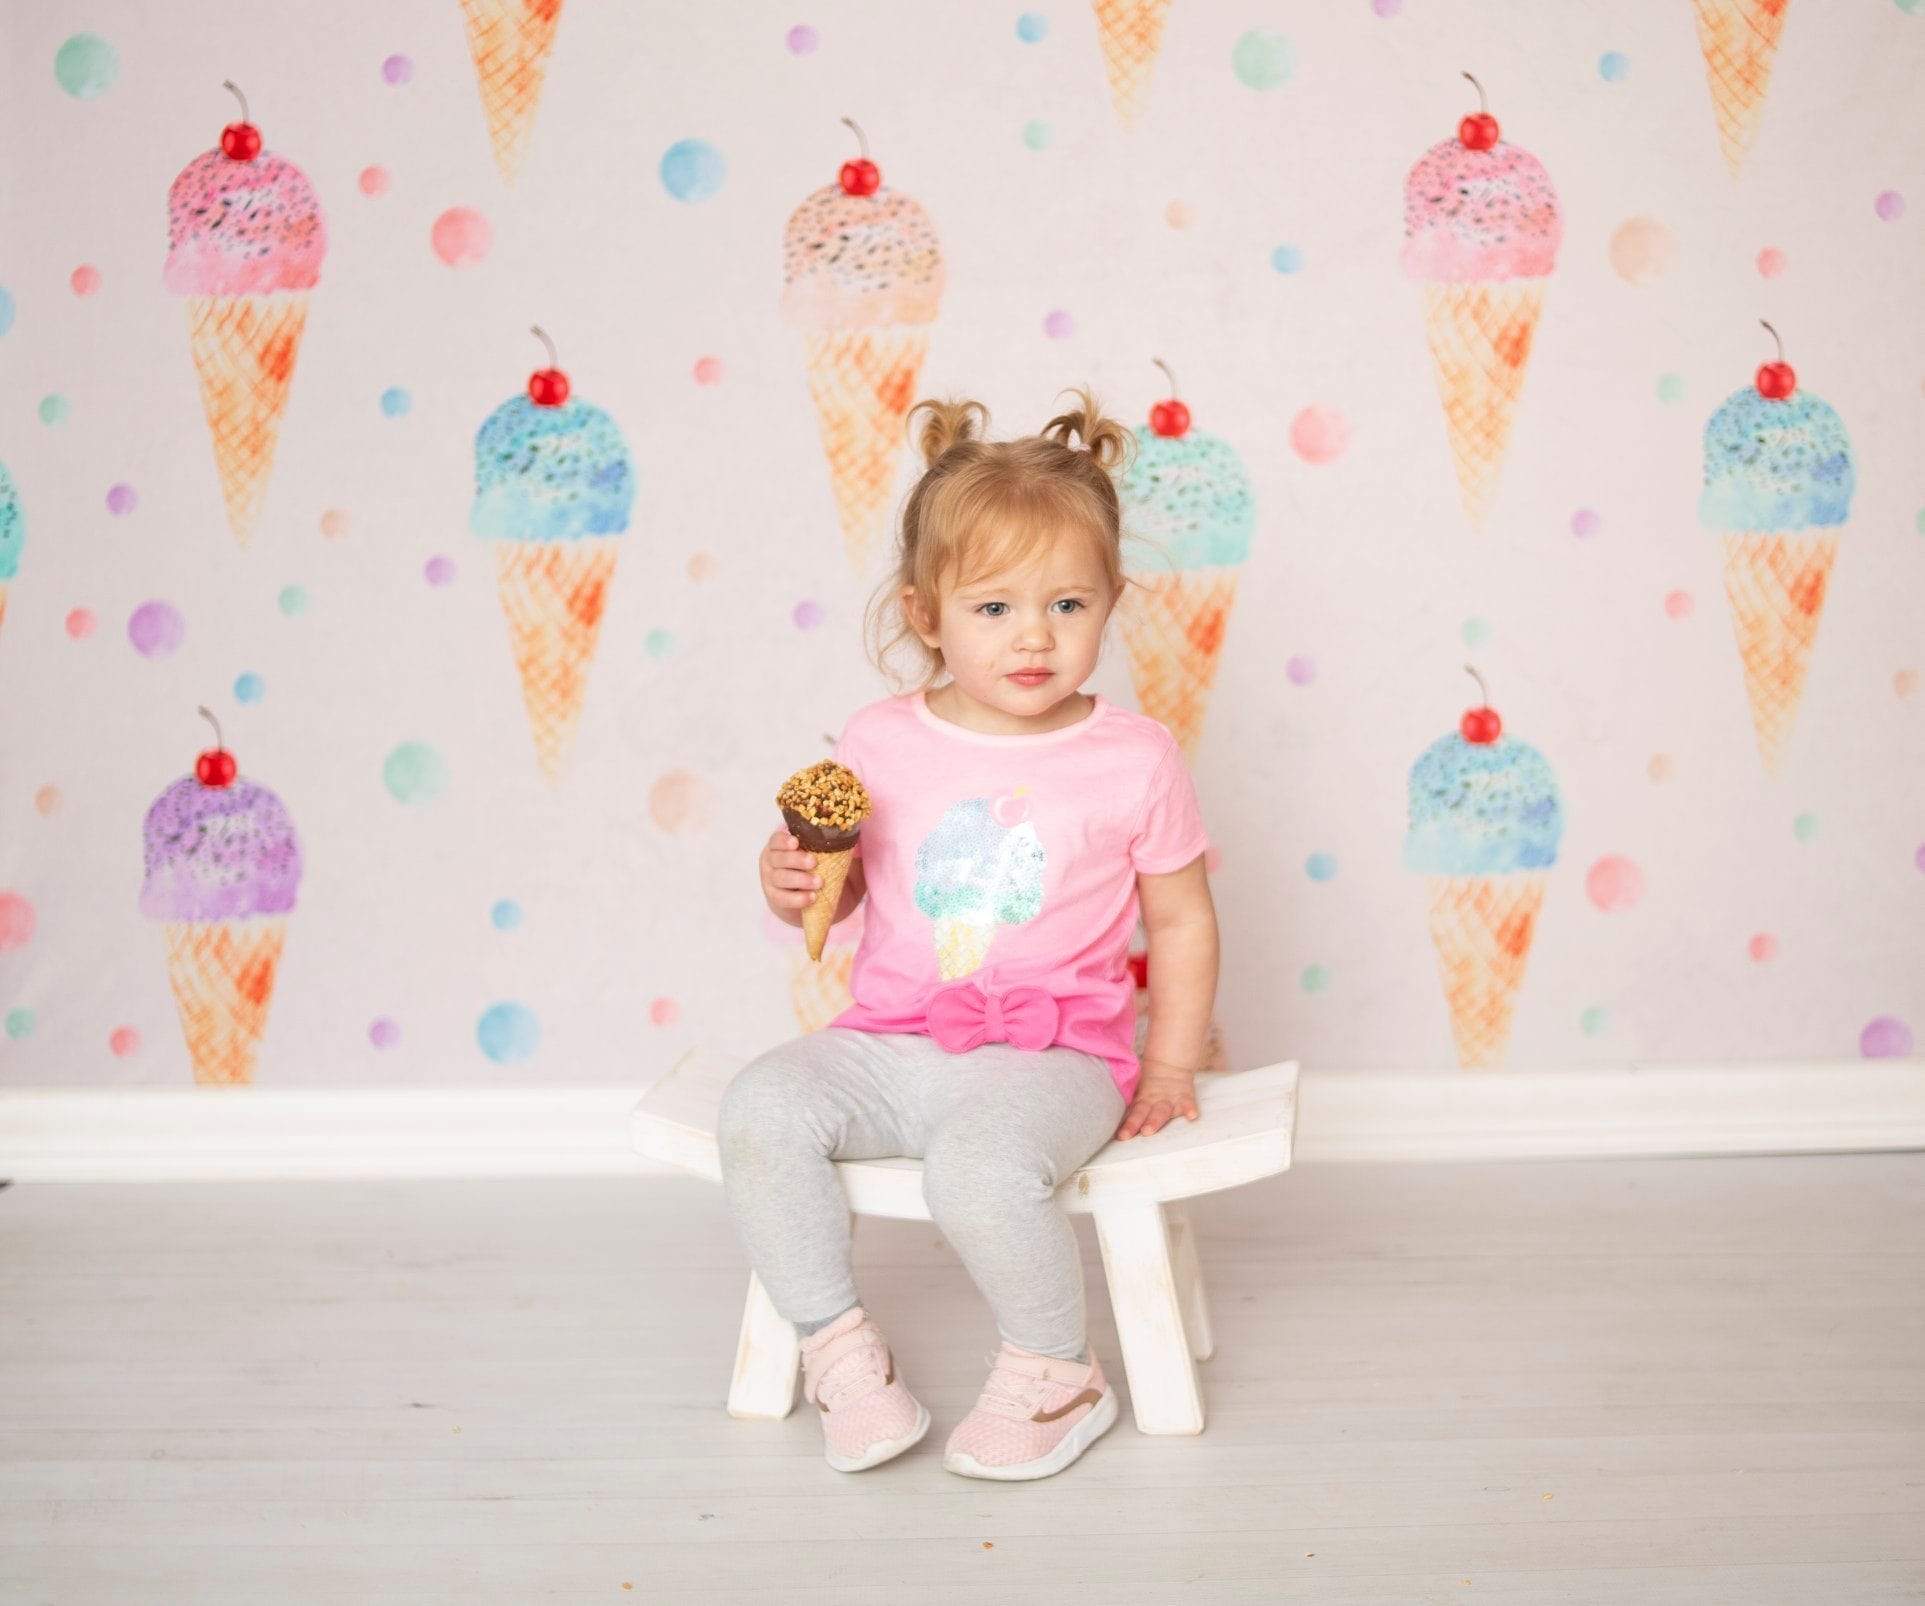 Katebackdrop鎷㈡綖Kate Beige Cute Ice-cream Summer Backdrop for Photography designed by Jerry_Sina